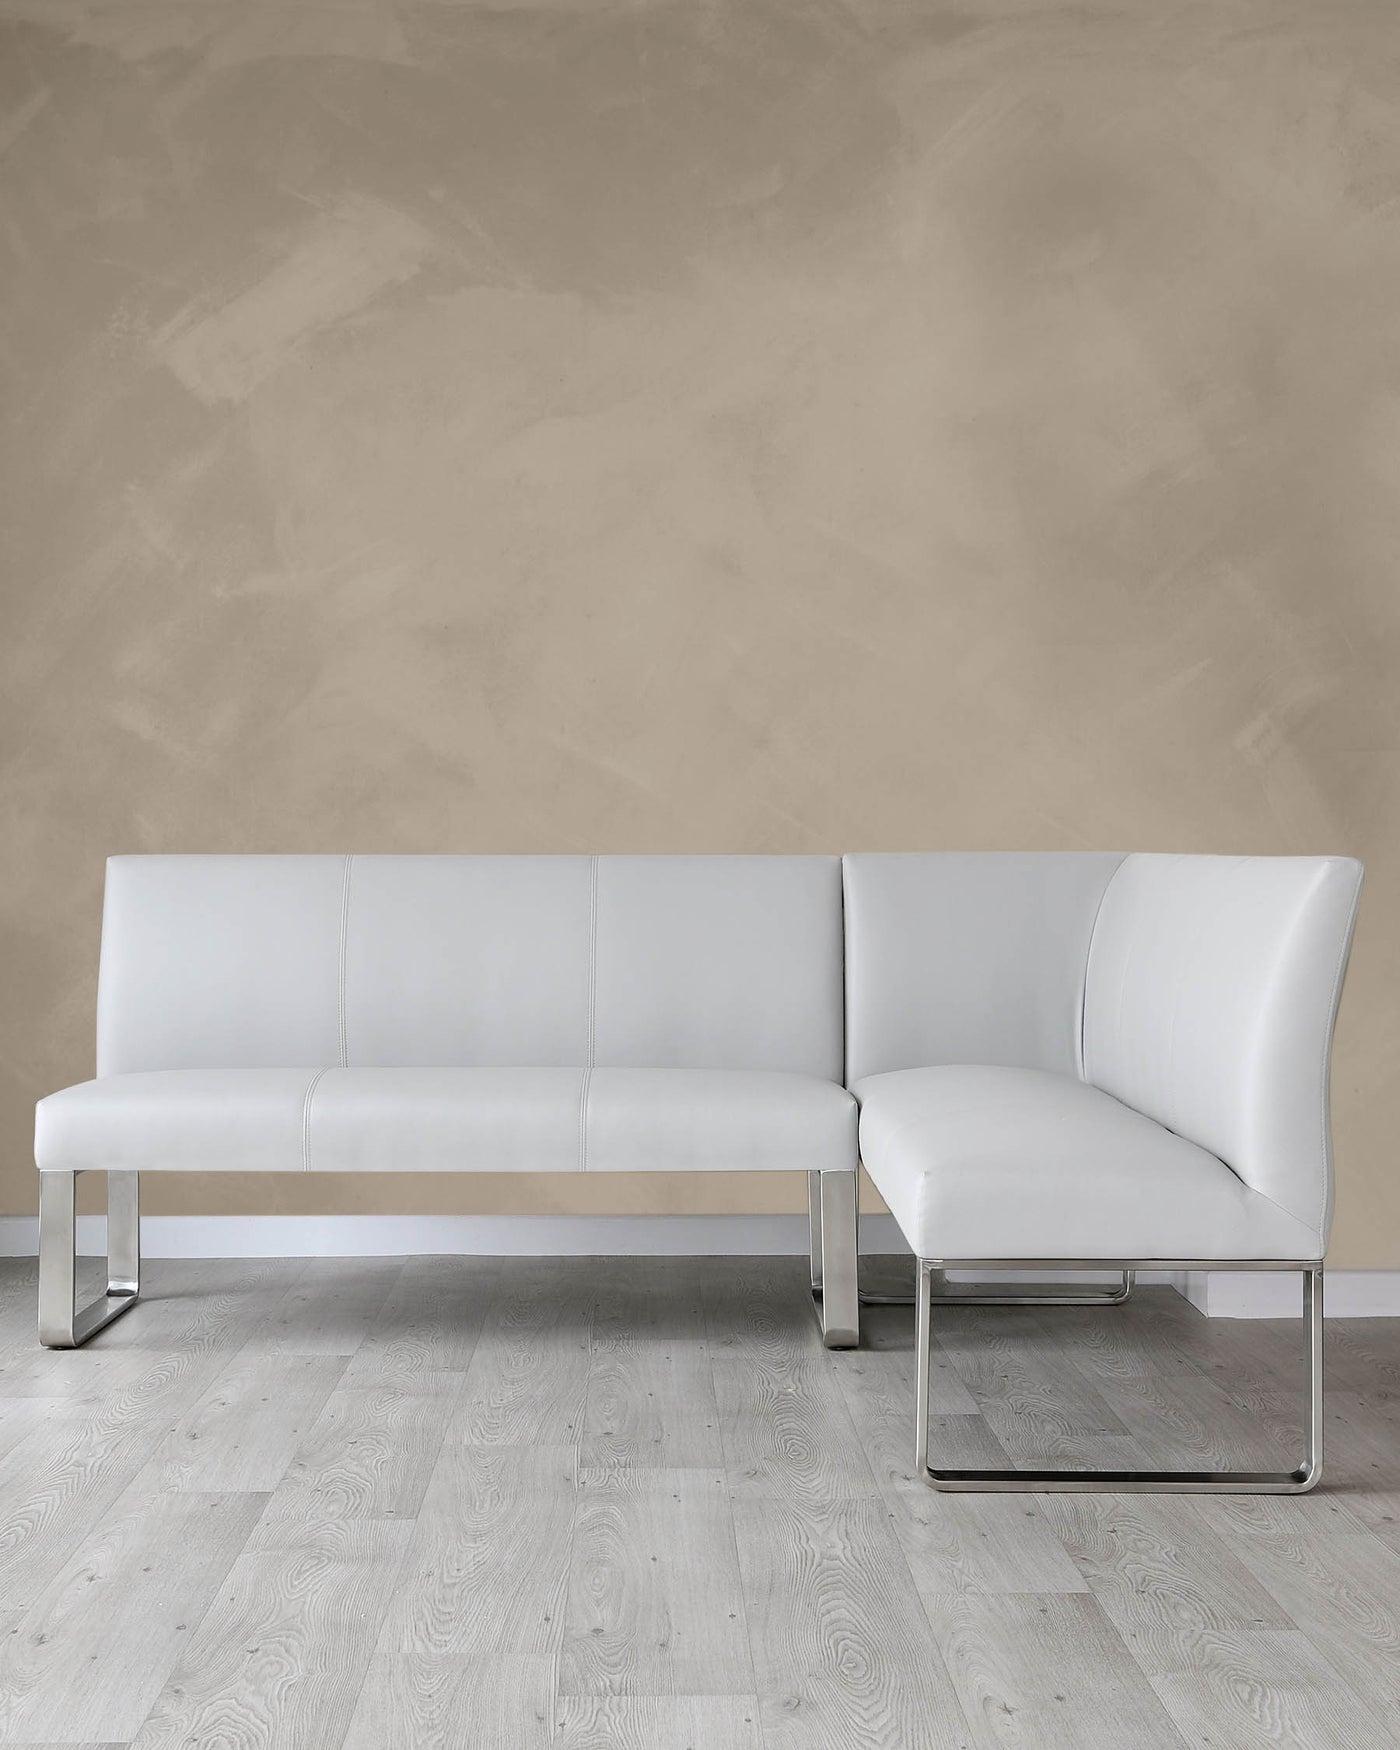 Modern L-shaped sectional sofa with white upholstery and sleek metal legs against a neutral wall on a light wooden floor.